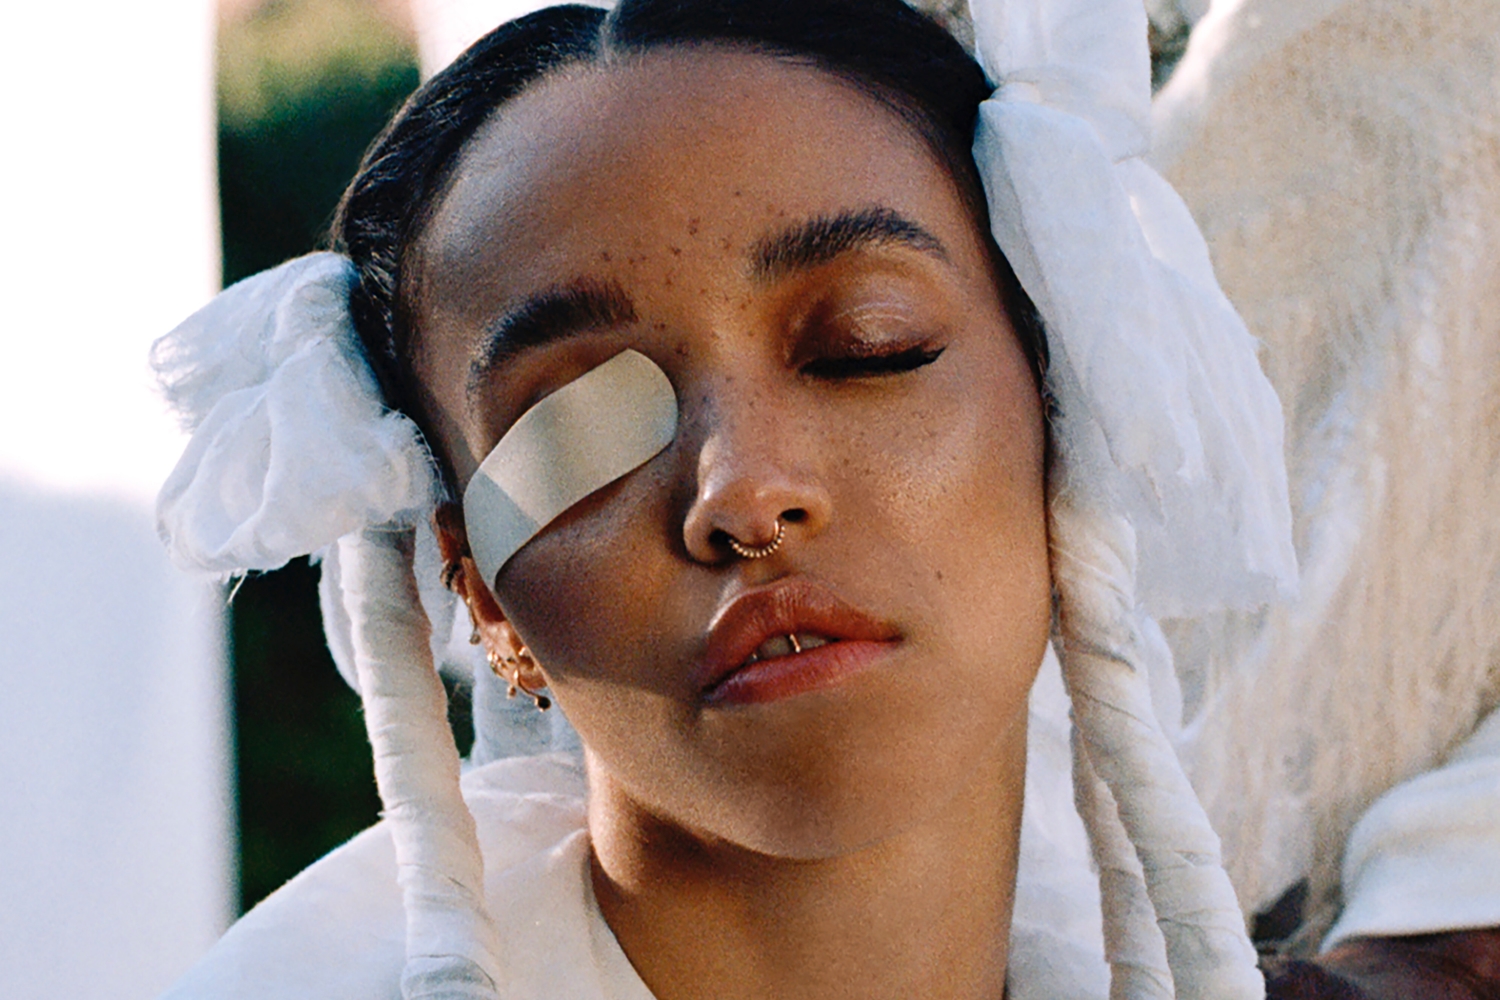 FKA twigs shares new song ‘Home With You’